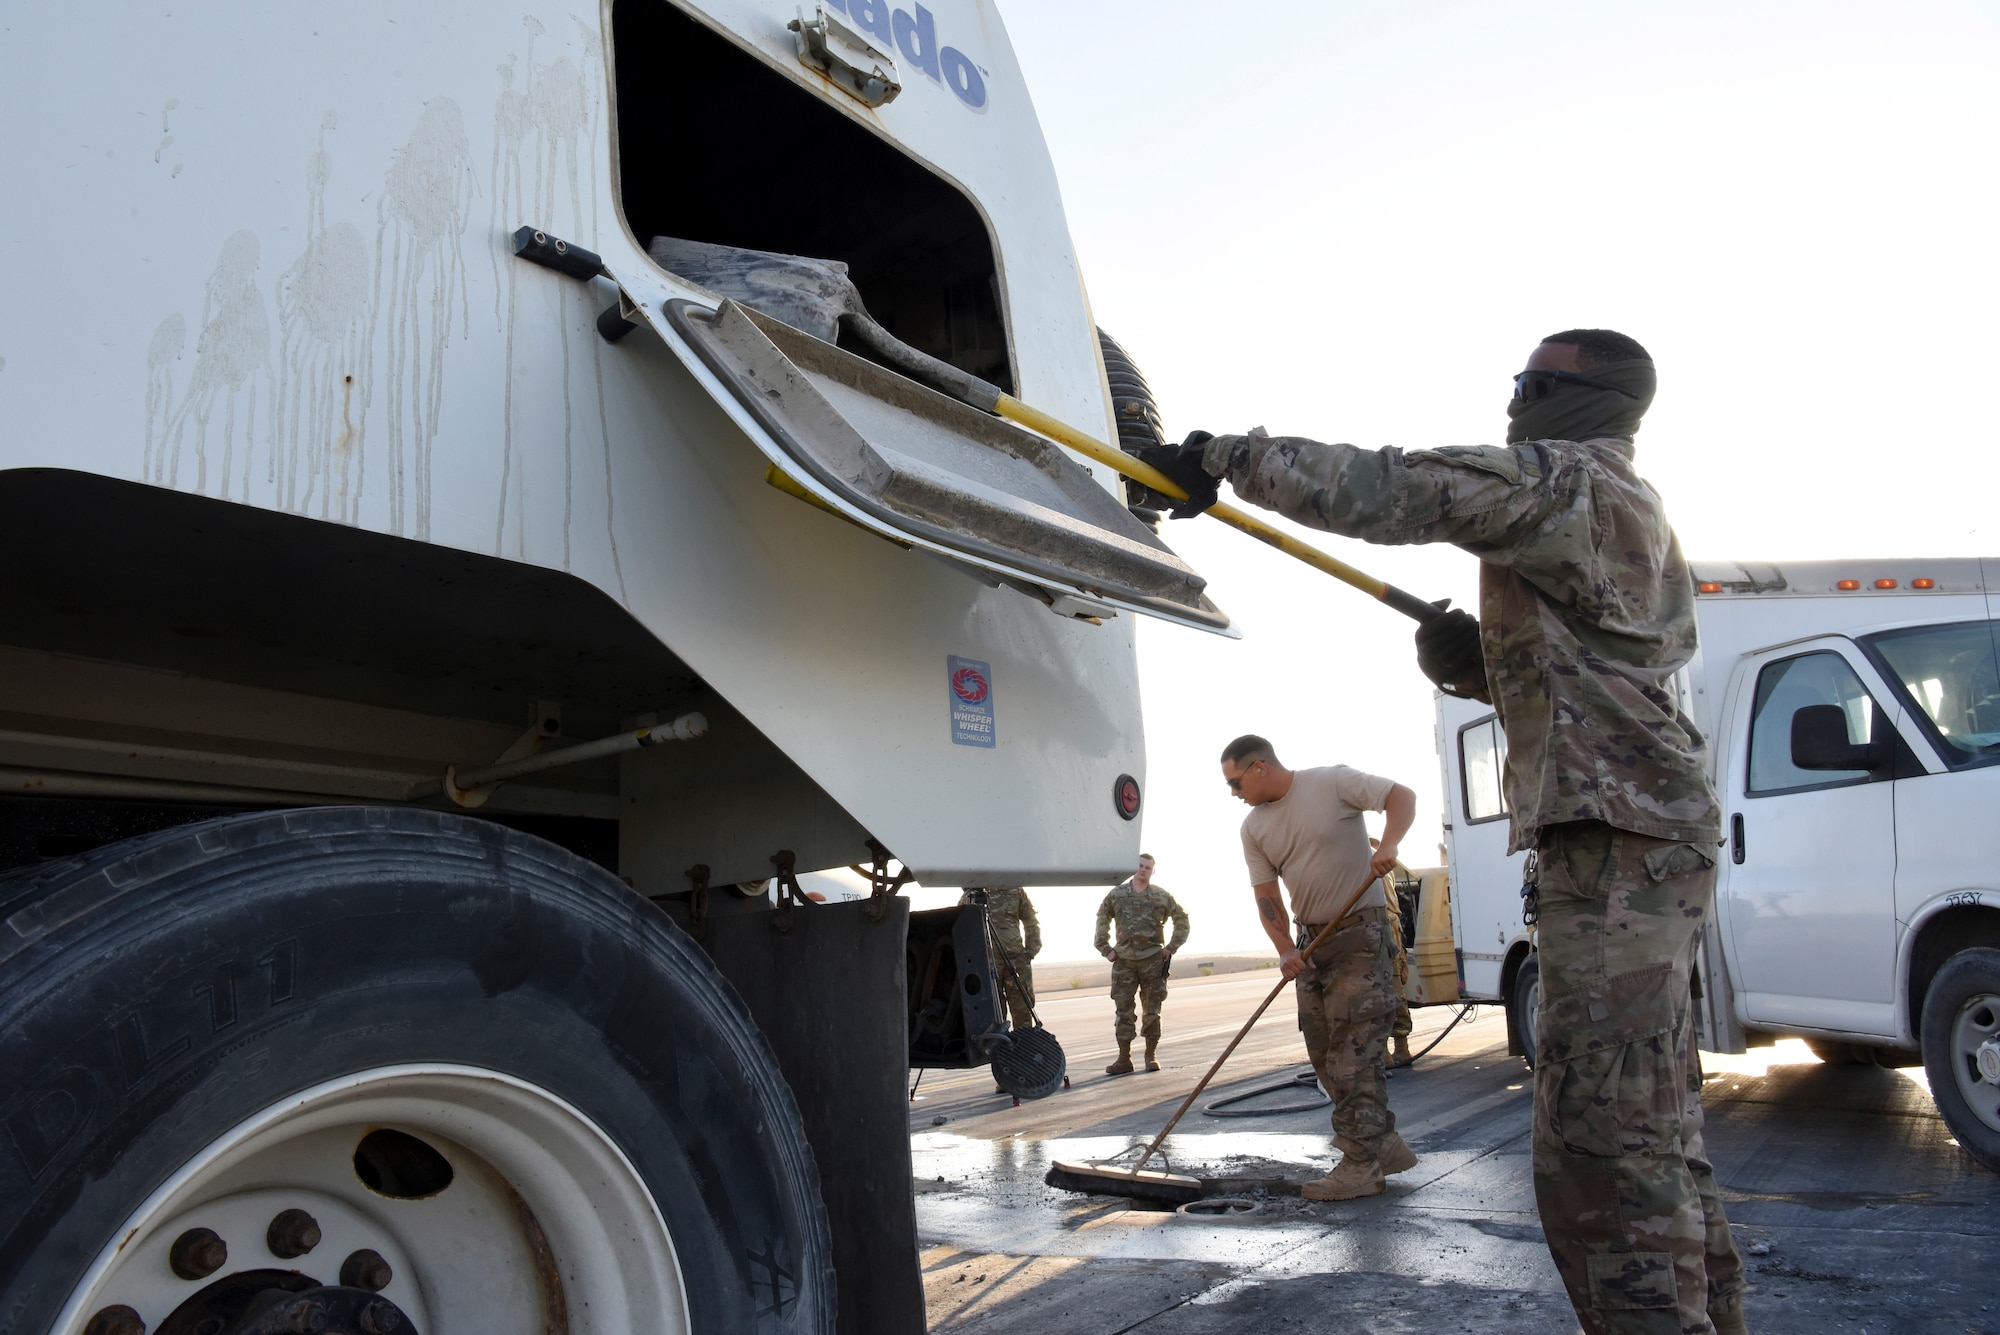 380th Expeditionary Civil Engineering Squadron pavement equipment journeymen Senior Airman Michael Horan (middle) sweeps debris while Airman 1st Class Kalvontae Smith (right), dumps it into the airfield sweeper during runway repairs at Al Dhafra Air Base, United Arab Emirates, Dec. 1, 2018.